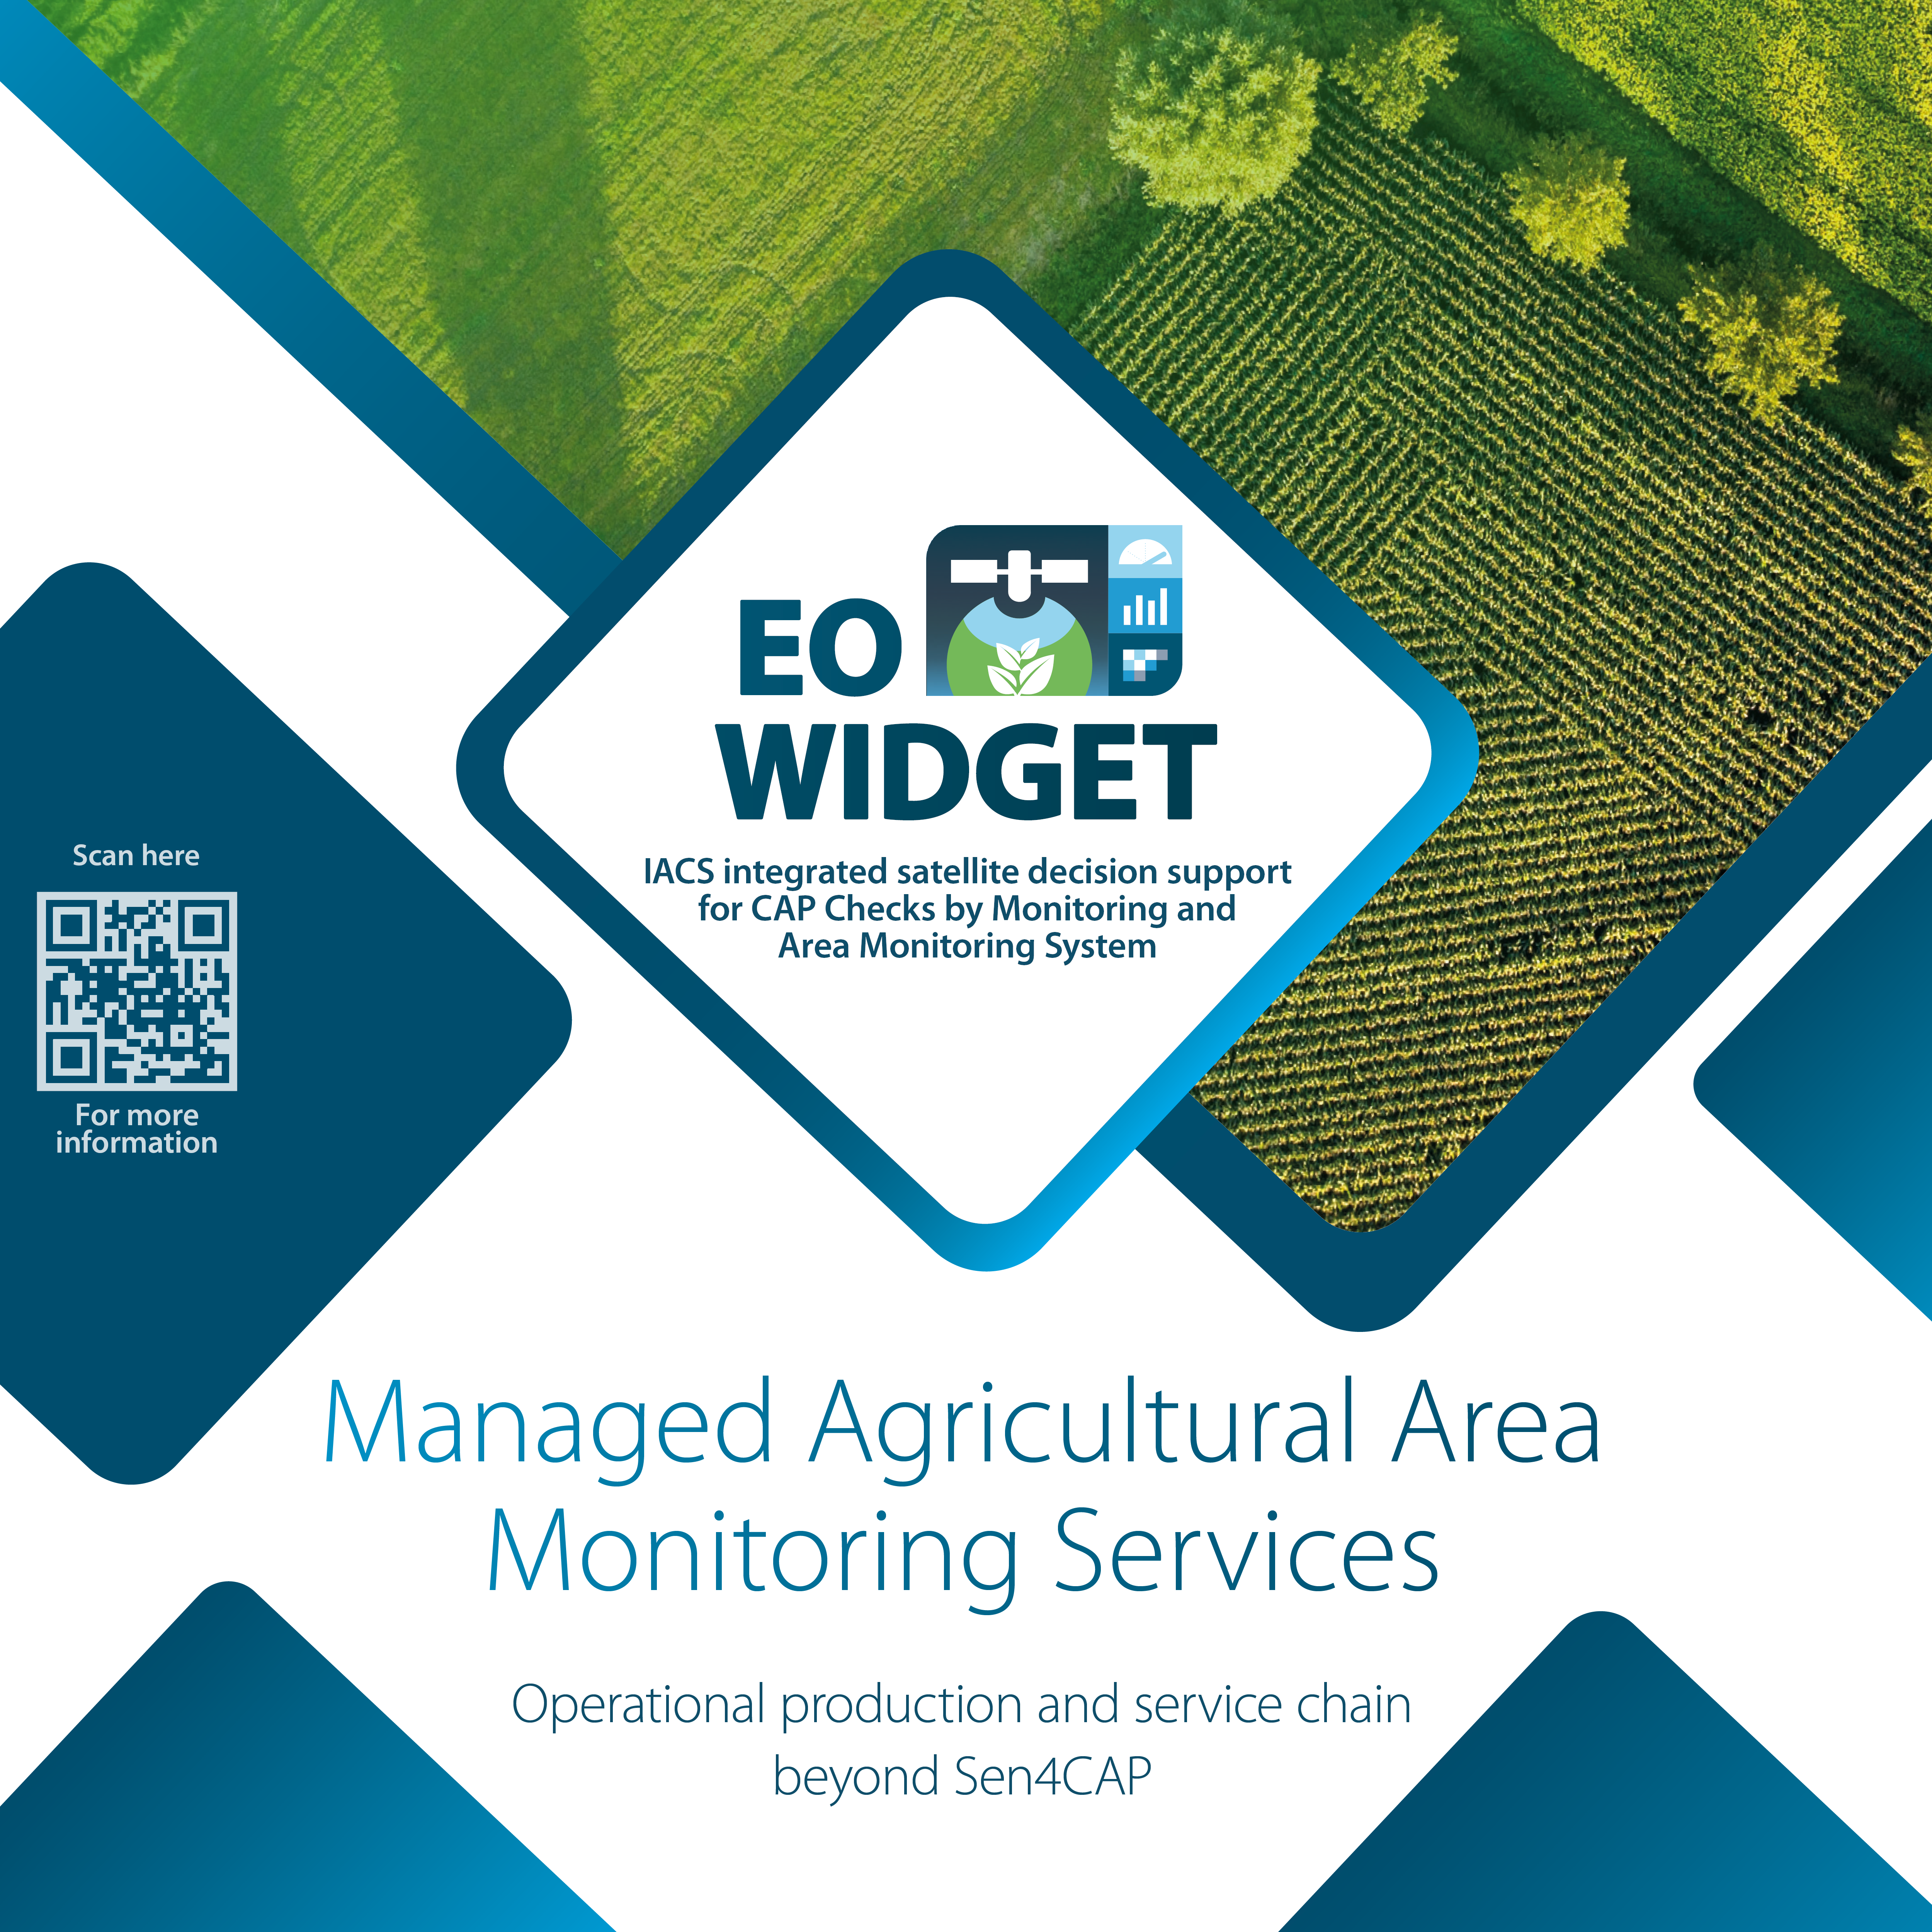 Widget-based Managed Agriculture Area Monitoring Service supporting the CAP